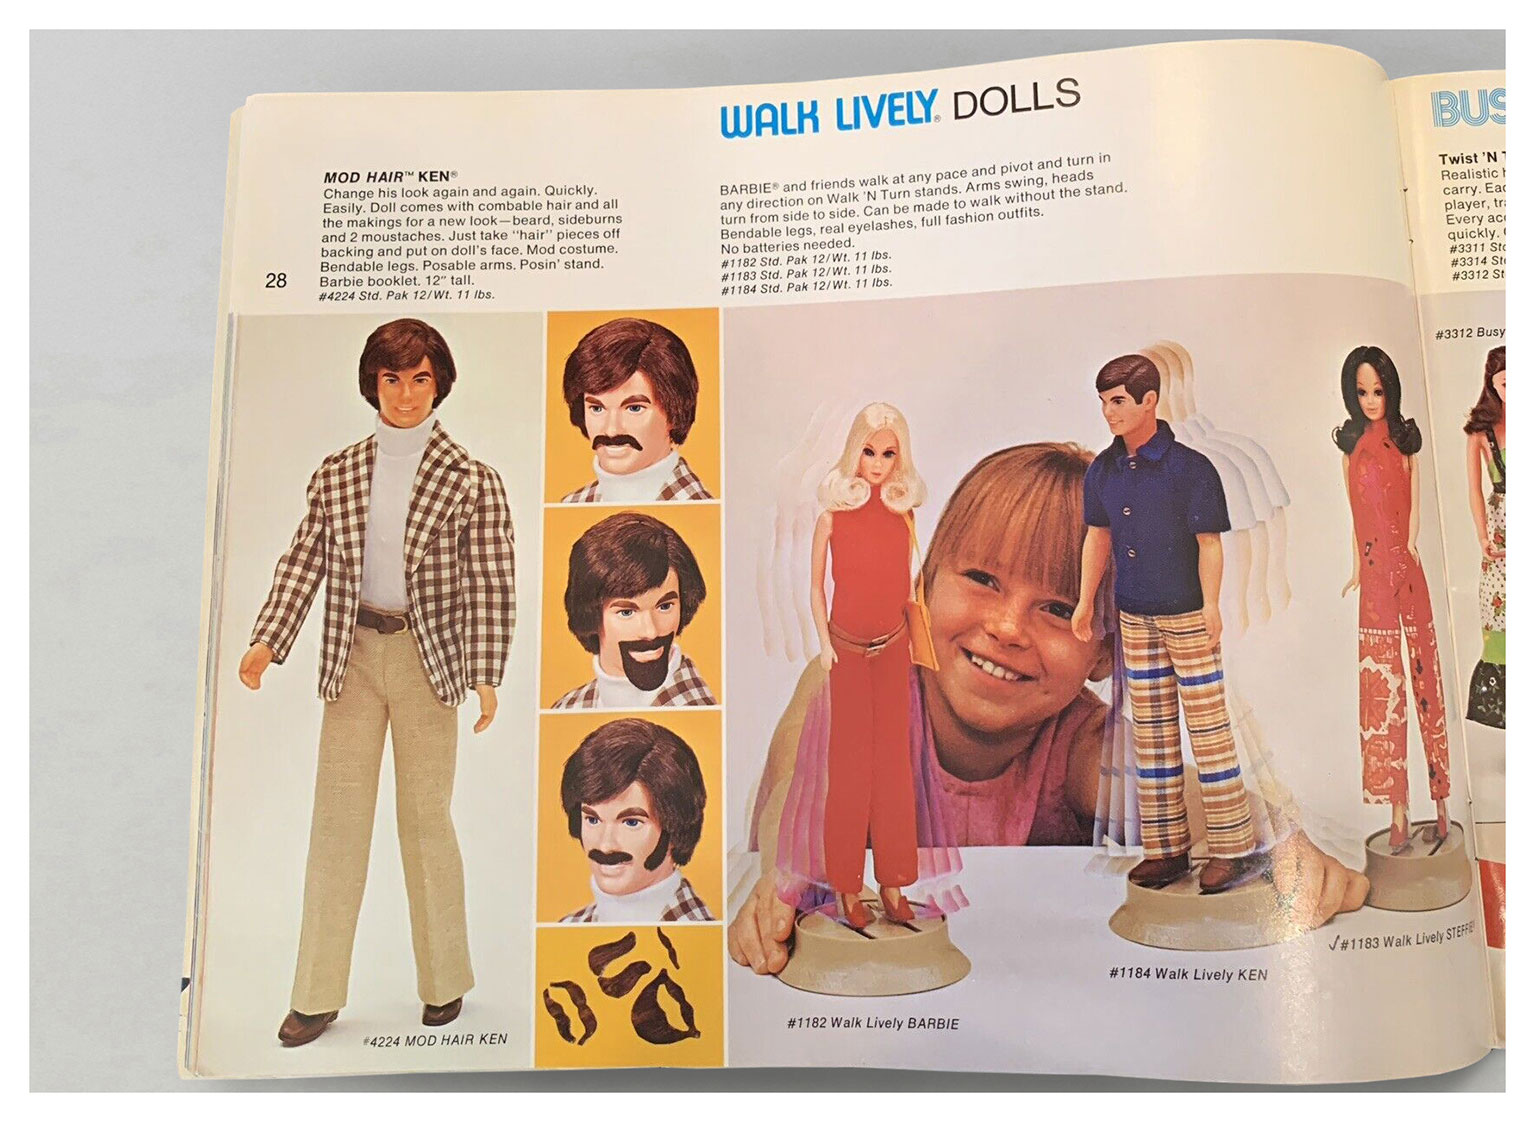 From Mattel Toys 1973 catalogue